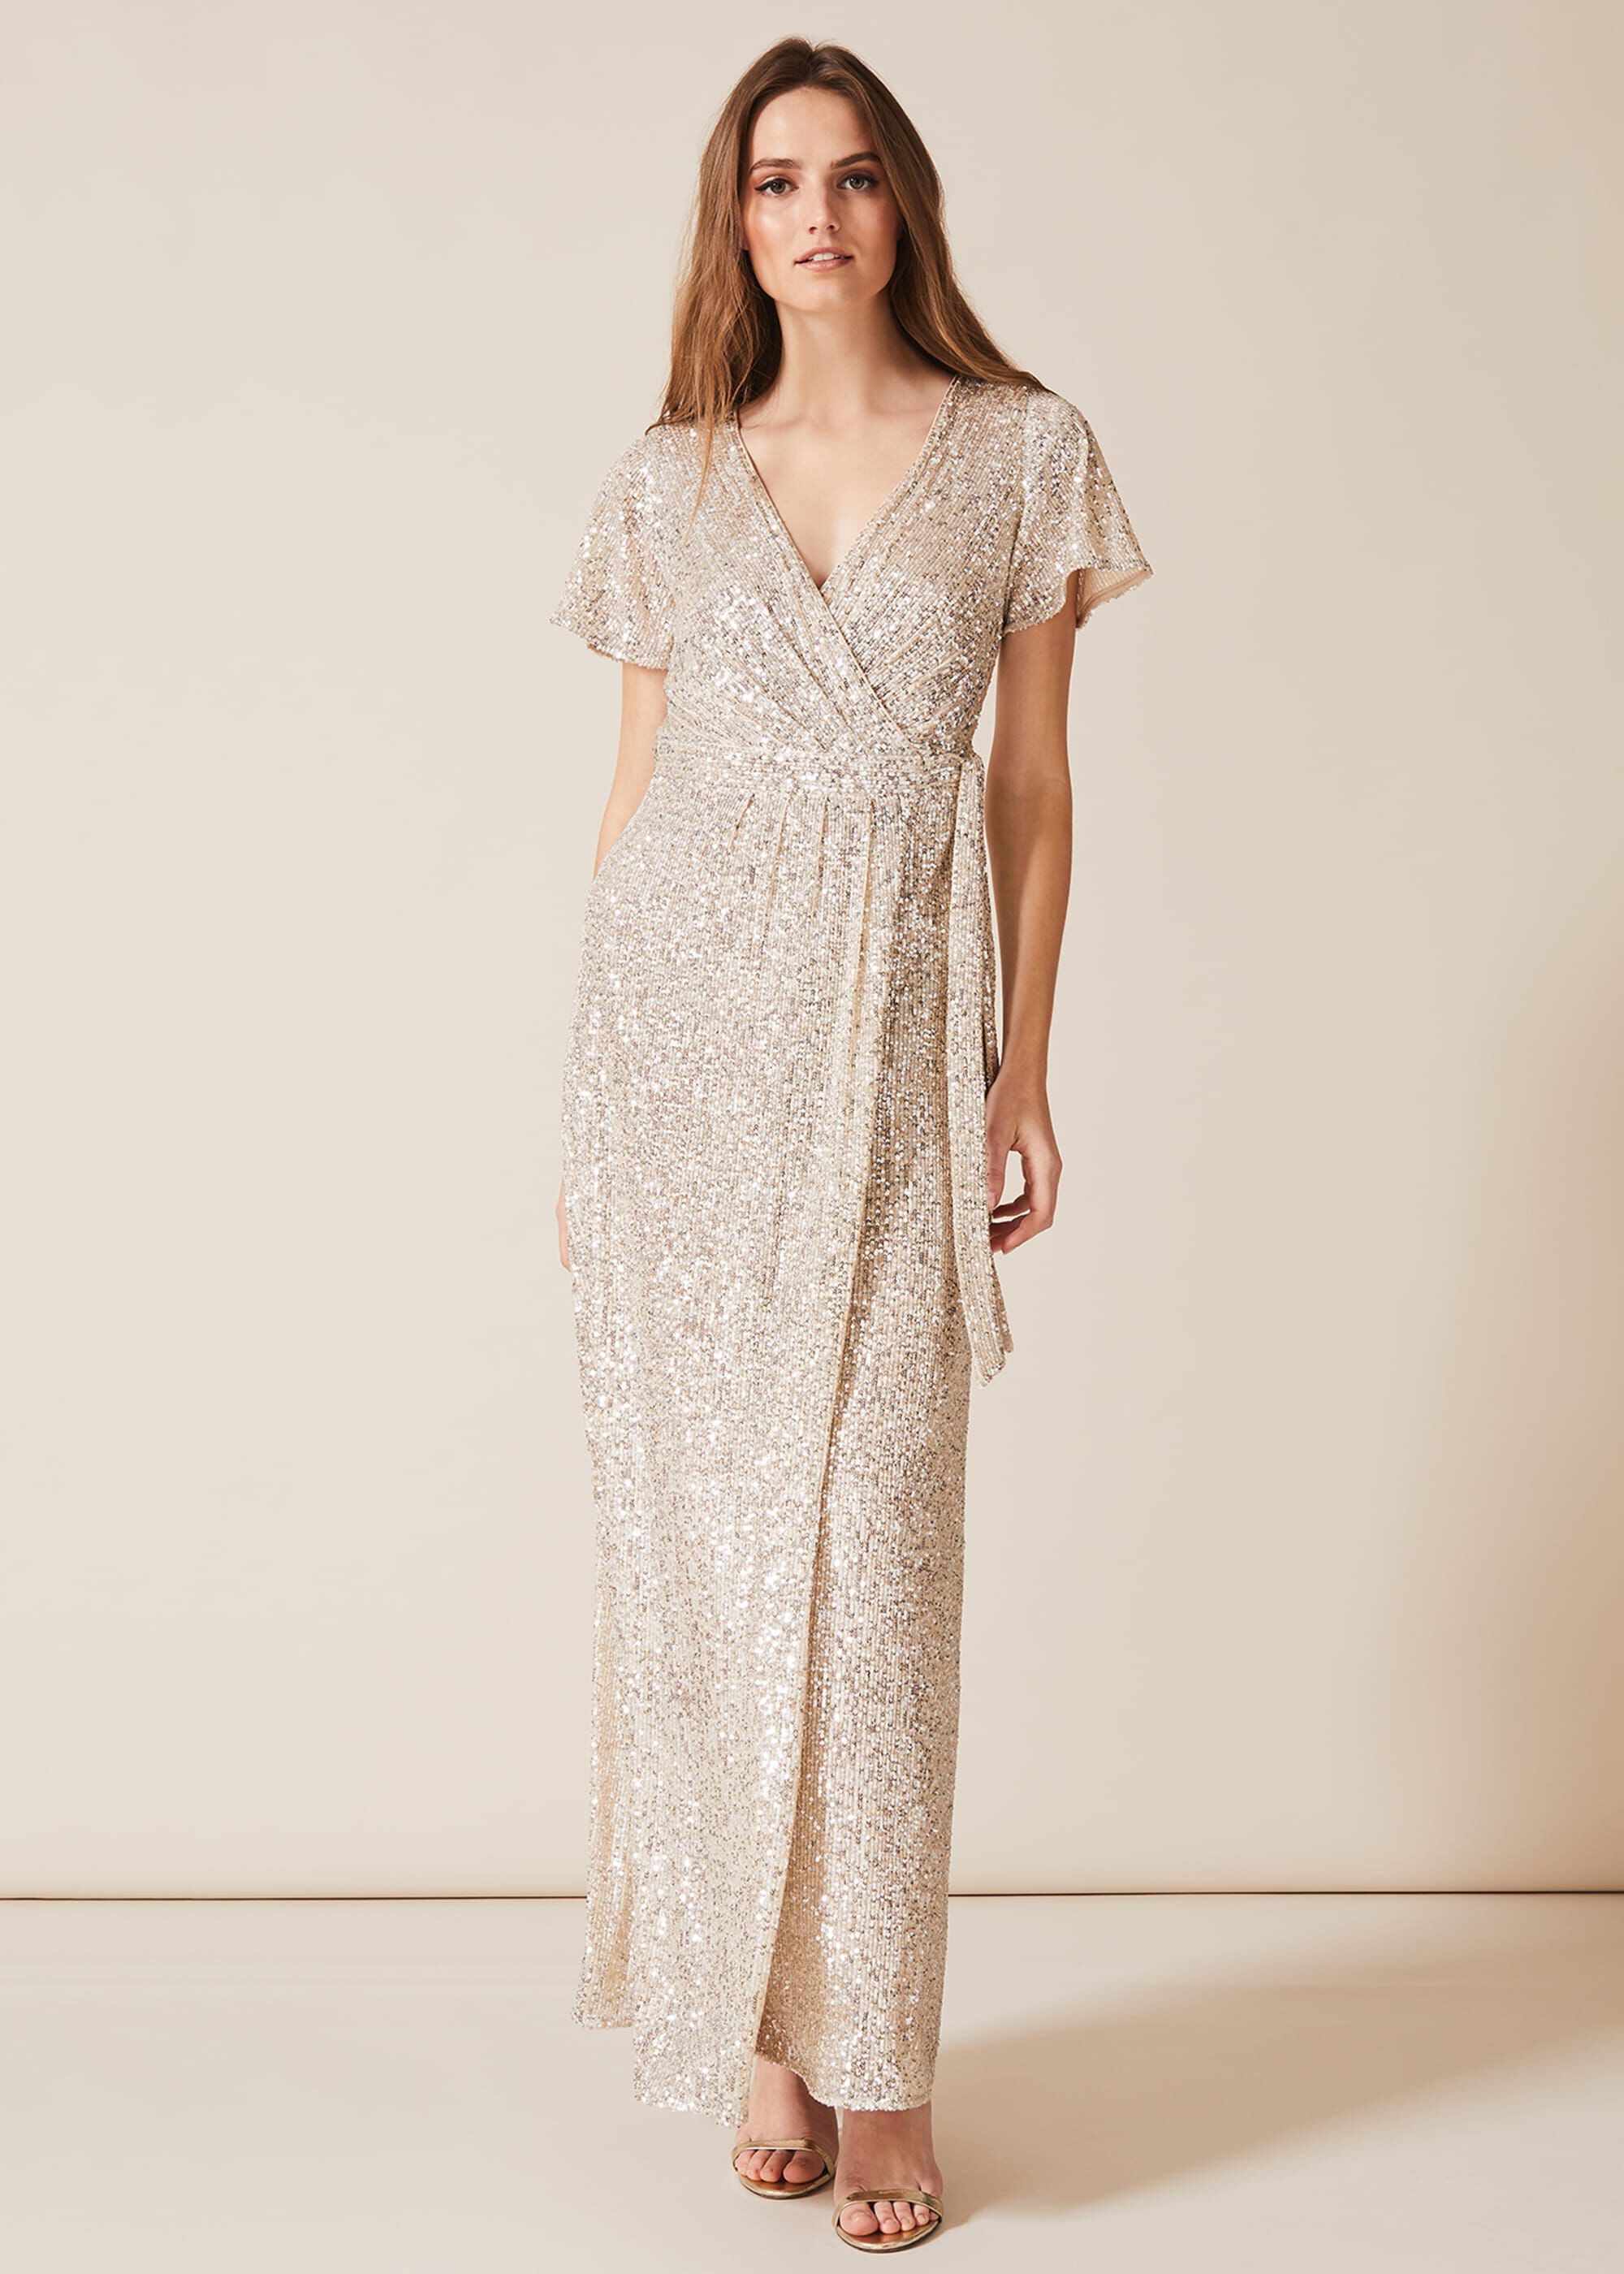 Amily Sequin Wrap Dress | Phase Eight